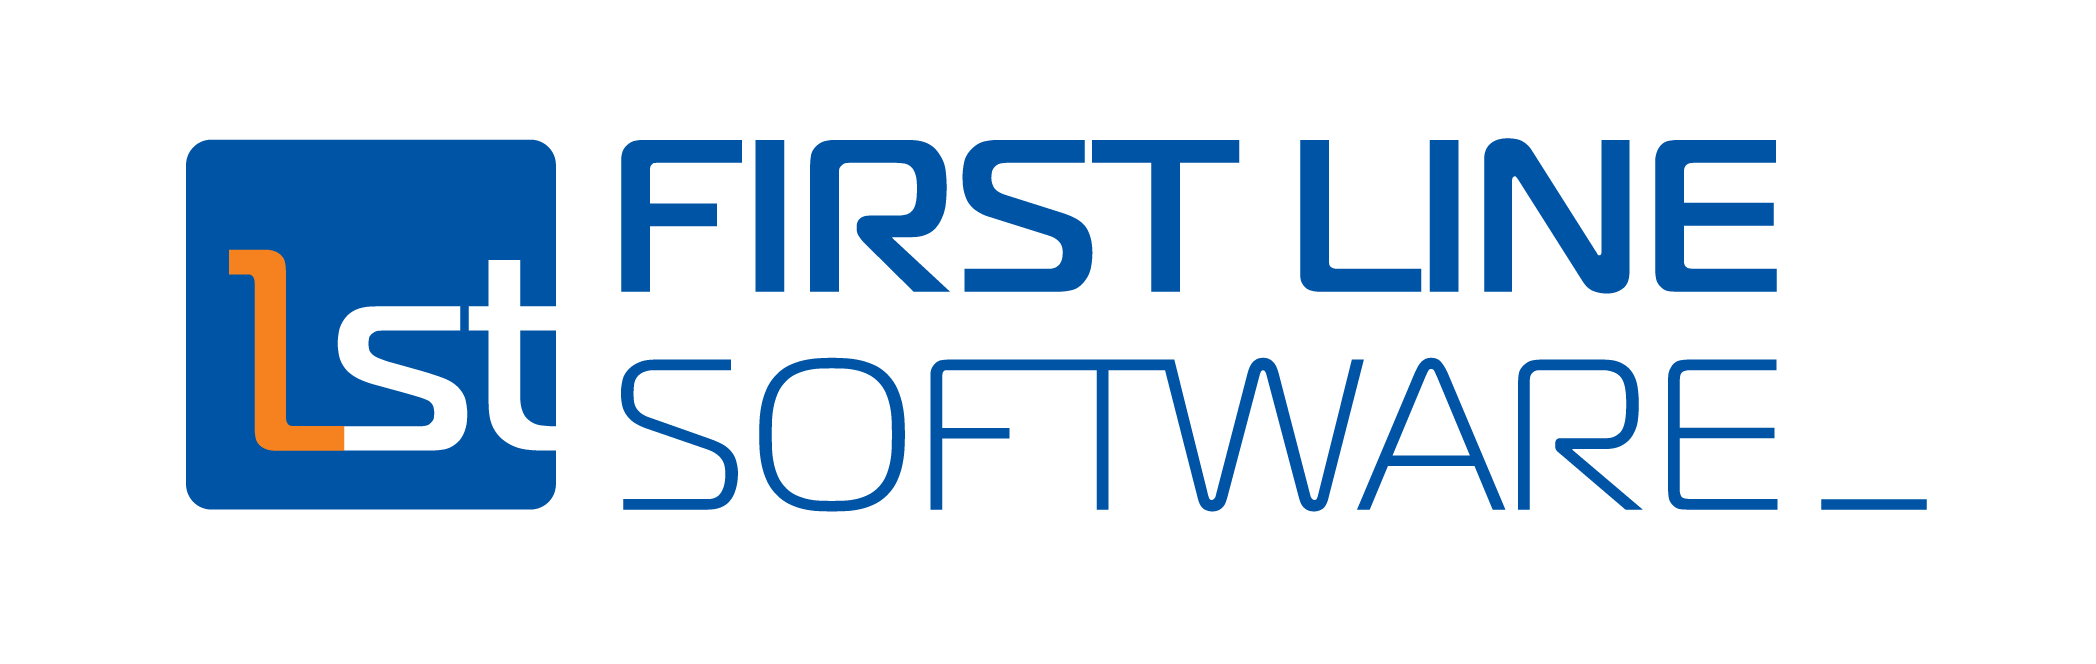 First line software логотип. First line software (ф-лайн софтвер) логотип. Software компания. One line логотип компания.